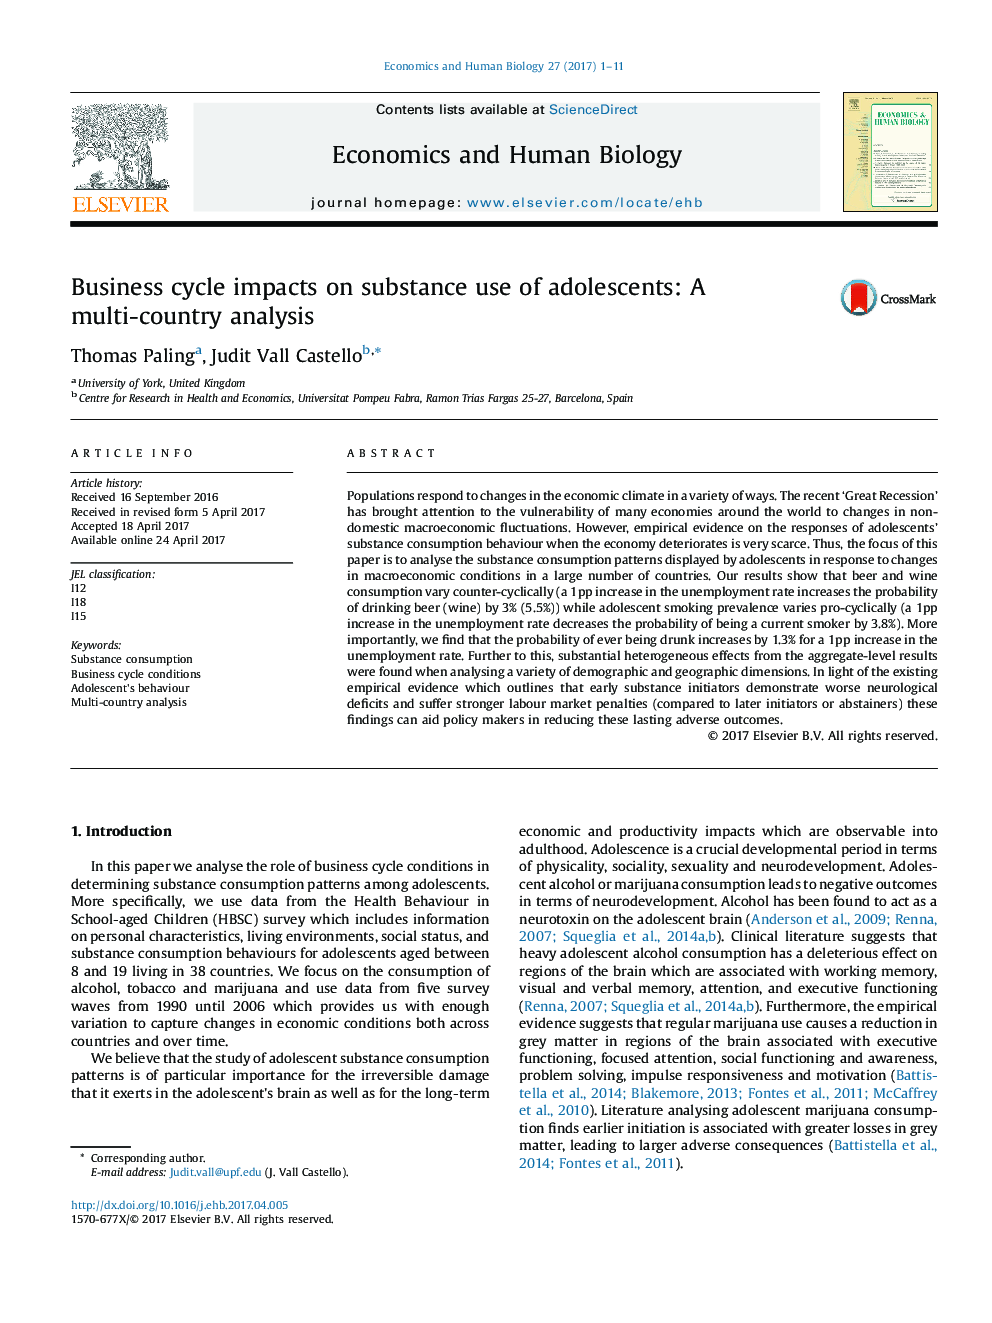 Business cycle impacts on substance use of adolescents: A multi-country analysis